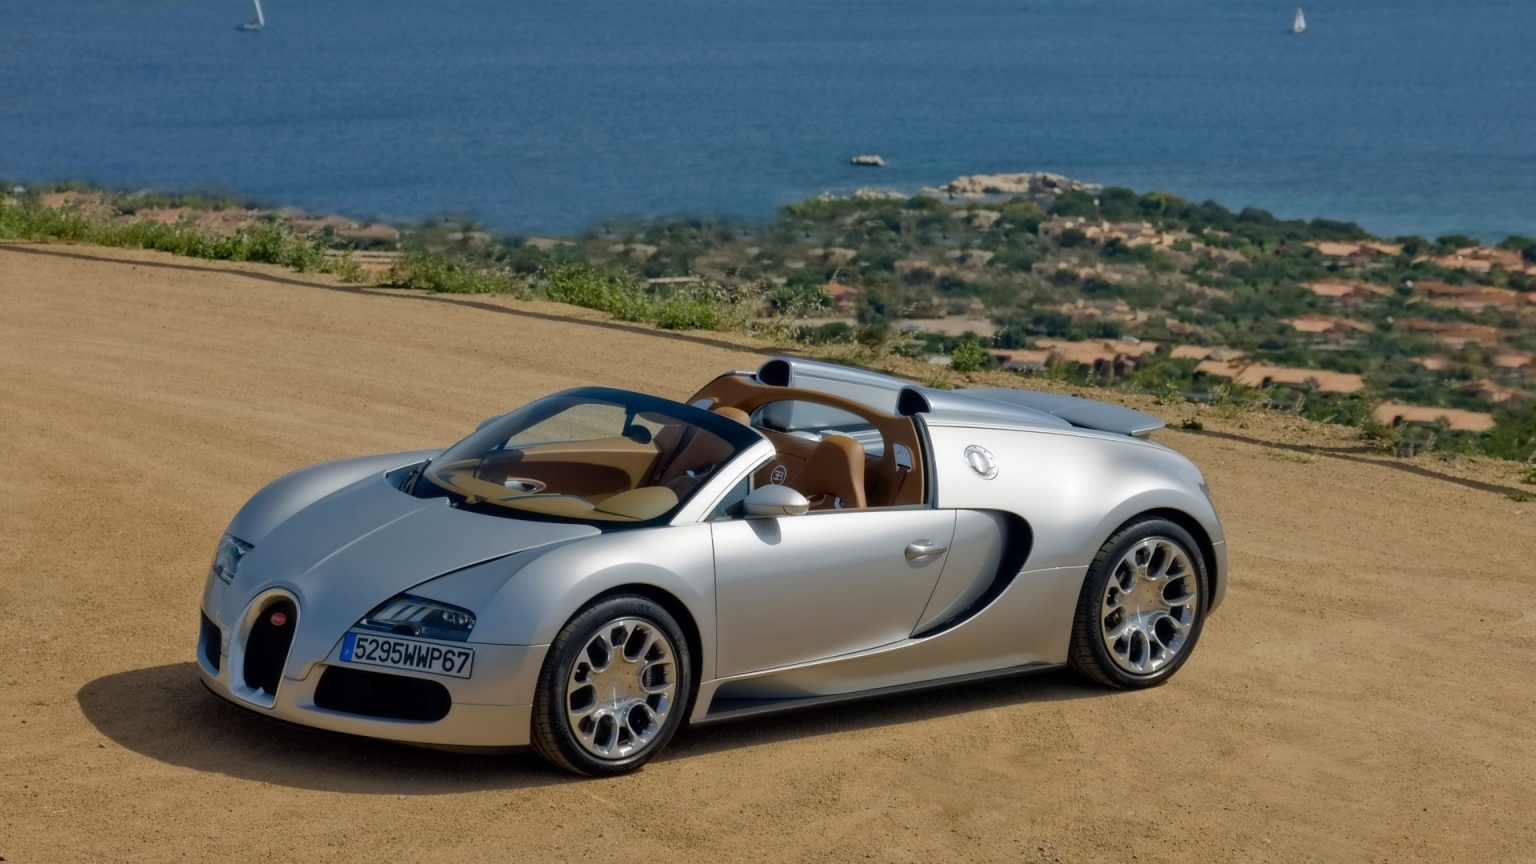 Bugatti Veyron 16.4 Grand Sport 2010 in Sardinia - Front And Side Panorama for 1536 x 864 HDTV resolution